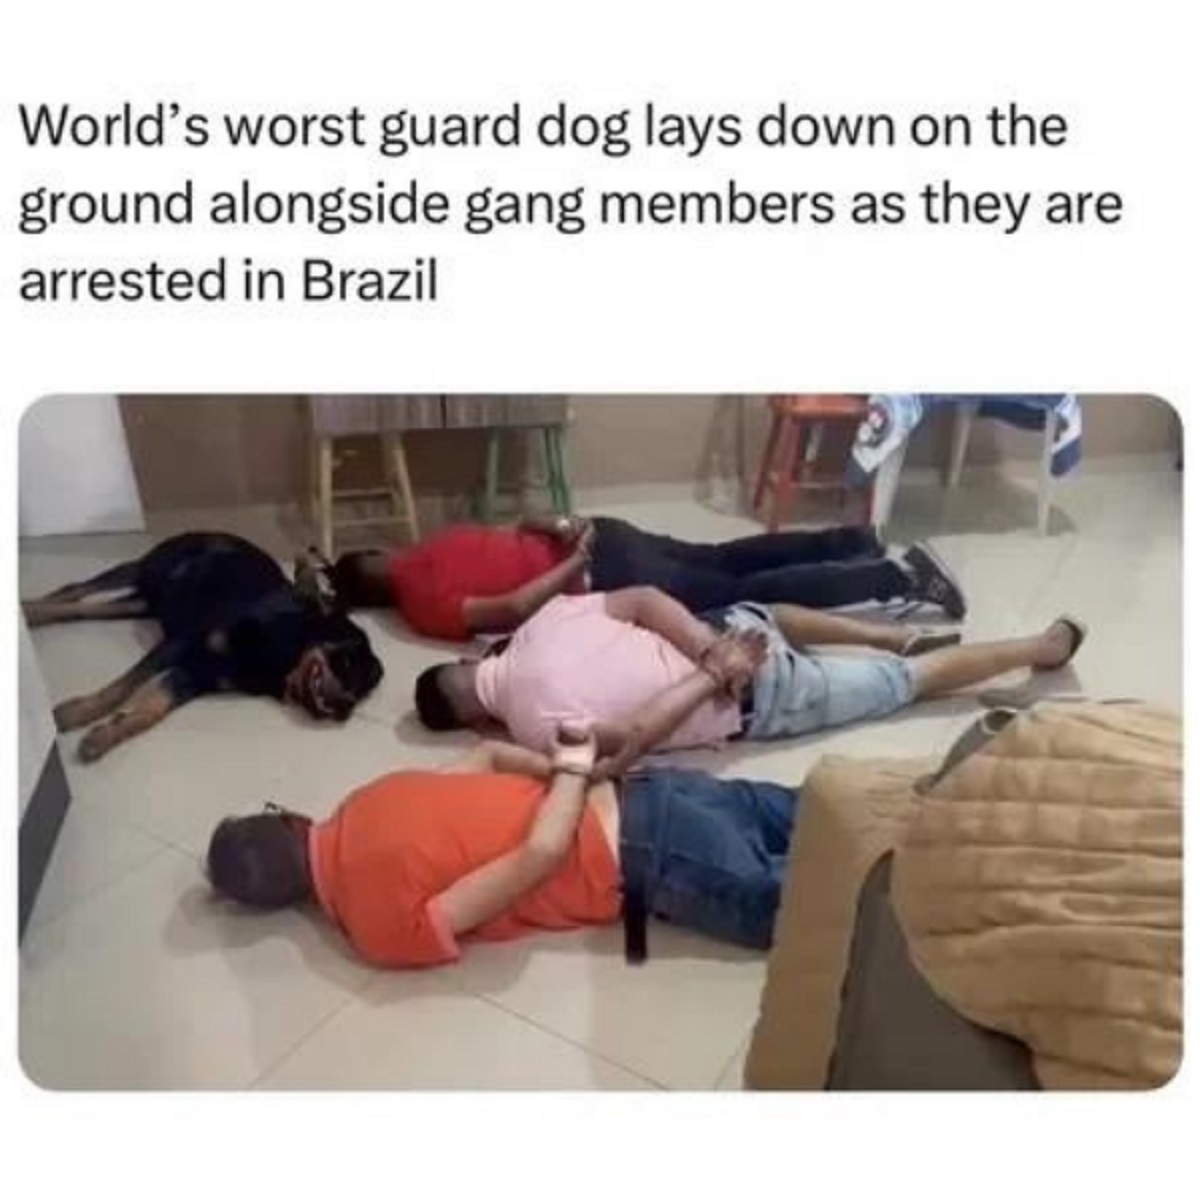 World's worst guard dog lays down on the ground alongside gang members as they are arrested in Brazil